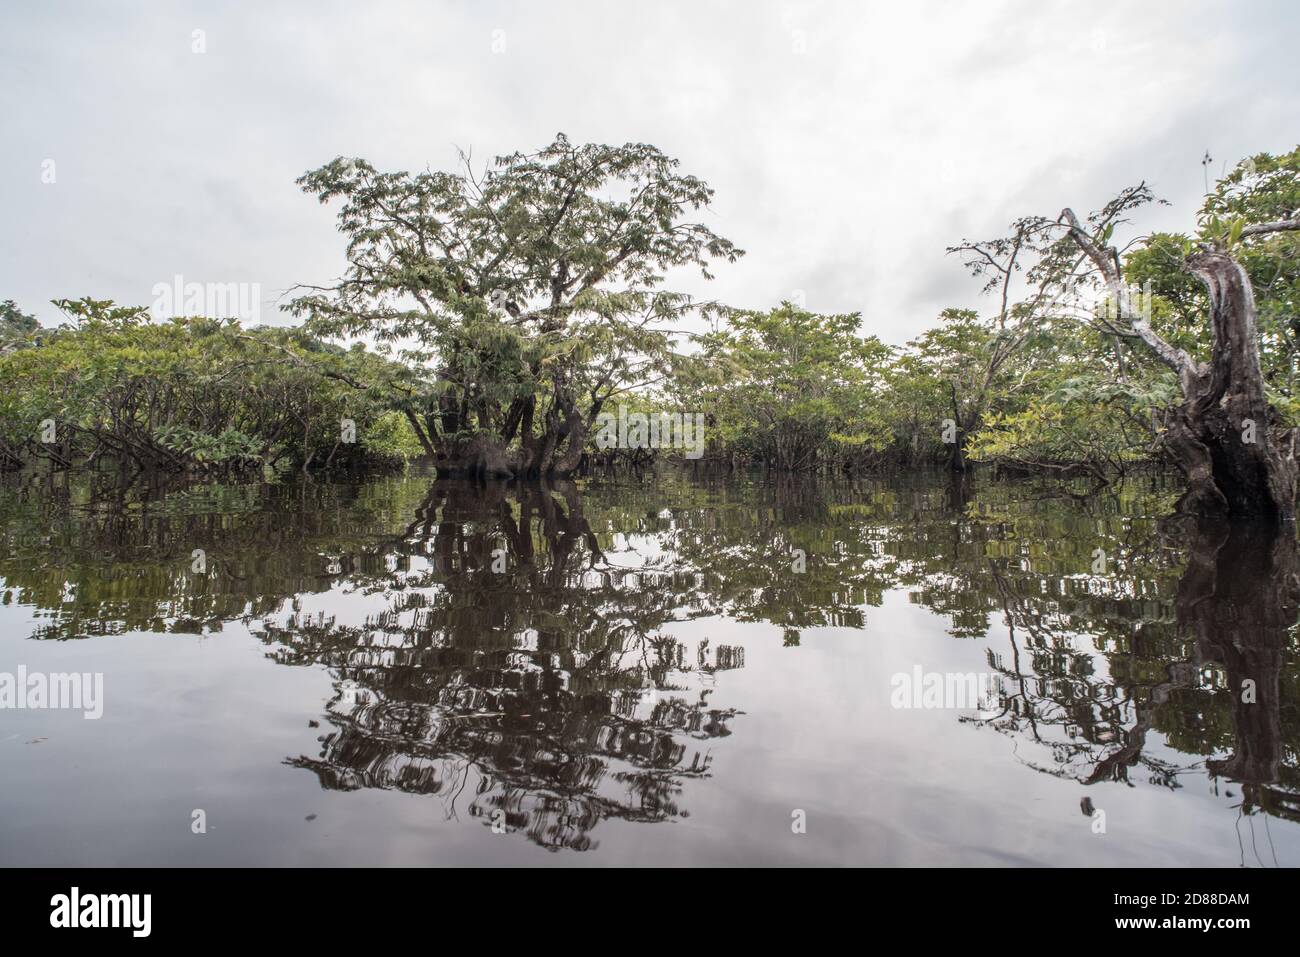 The flooded amazonian forest of Cuyabeno wildlife reserve in Ecuador. Stock Photo